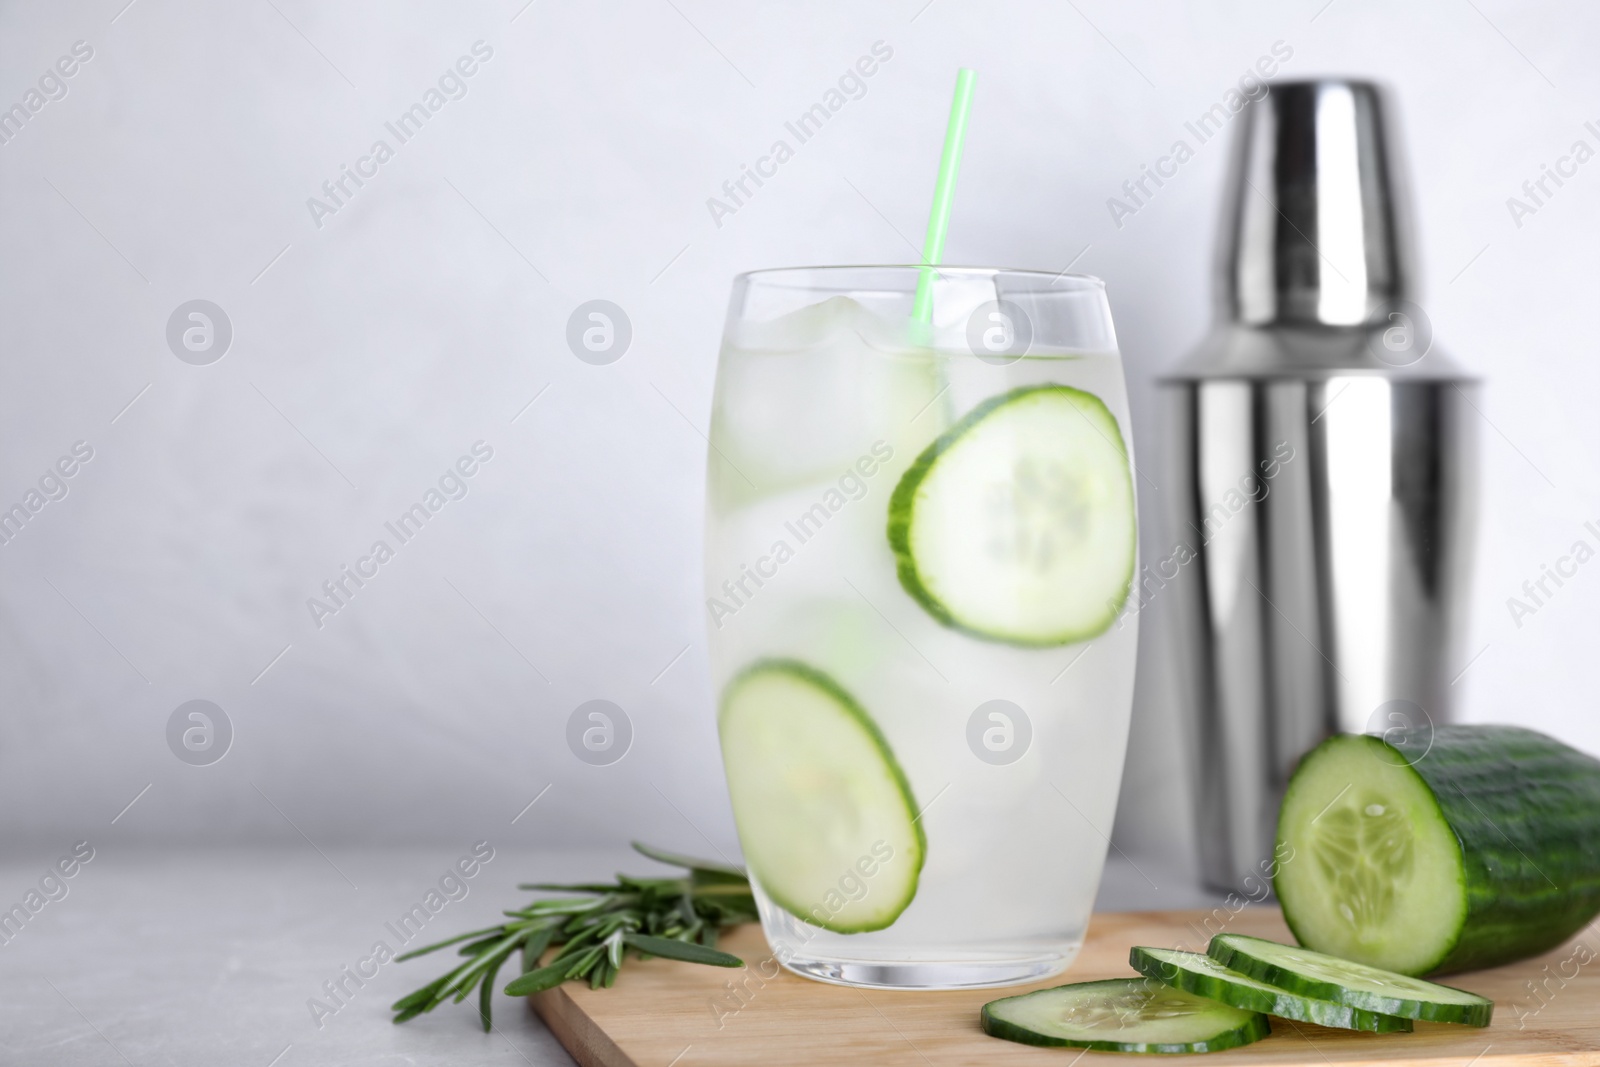 Photo of Composition with glass of cucumber martini on table against light background. Space for text